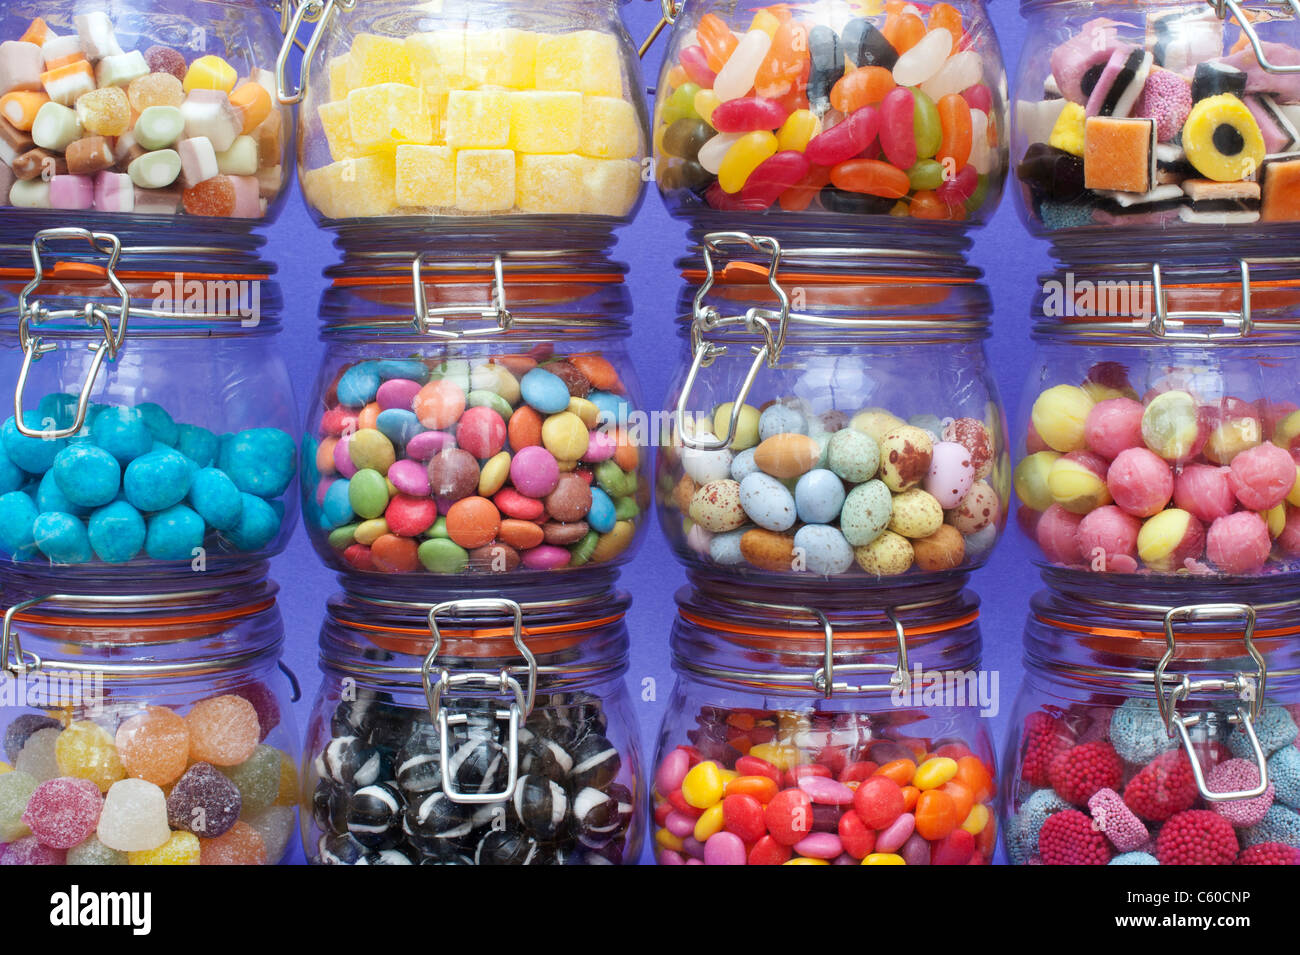 Colourful childrens sweets in kilner jars. Liquorice allsorts, Smarties, pineapple cubes, humbugs, bonbons, dolly mixtures, jelly beans and mini eggs Stock Photo